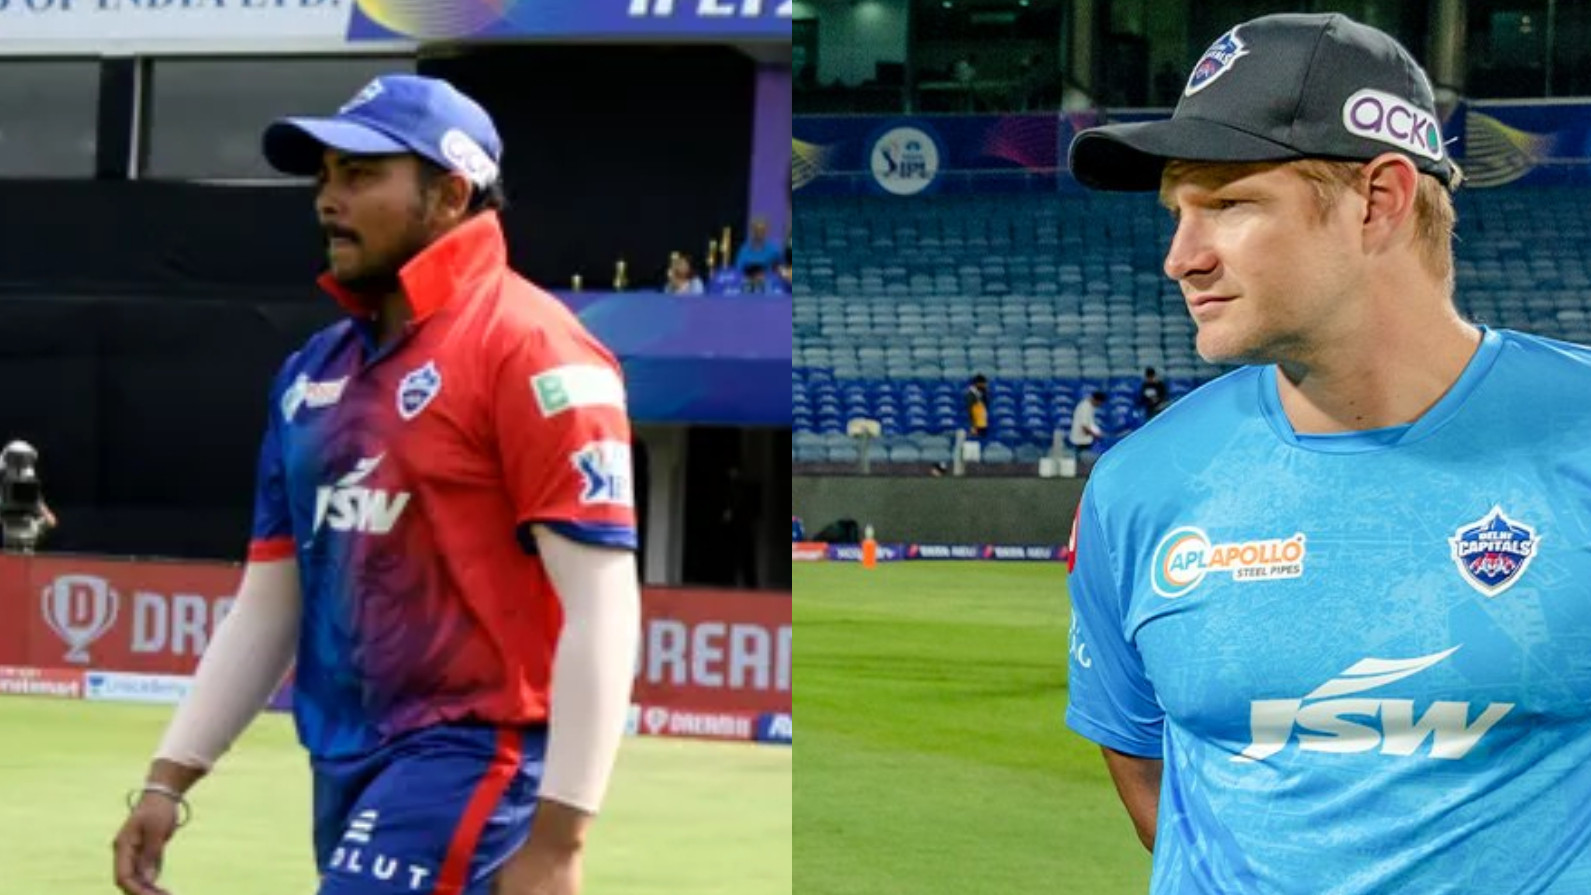 IPL 2022: DC's Shane Watson calls Prithvi Shaw one of the most 'incredibly skilled young cricketers' he has seen